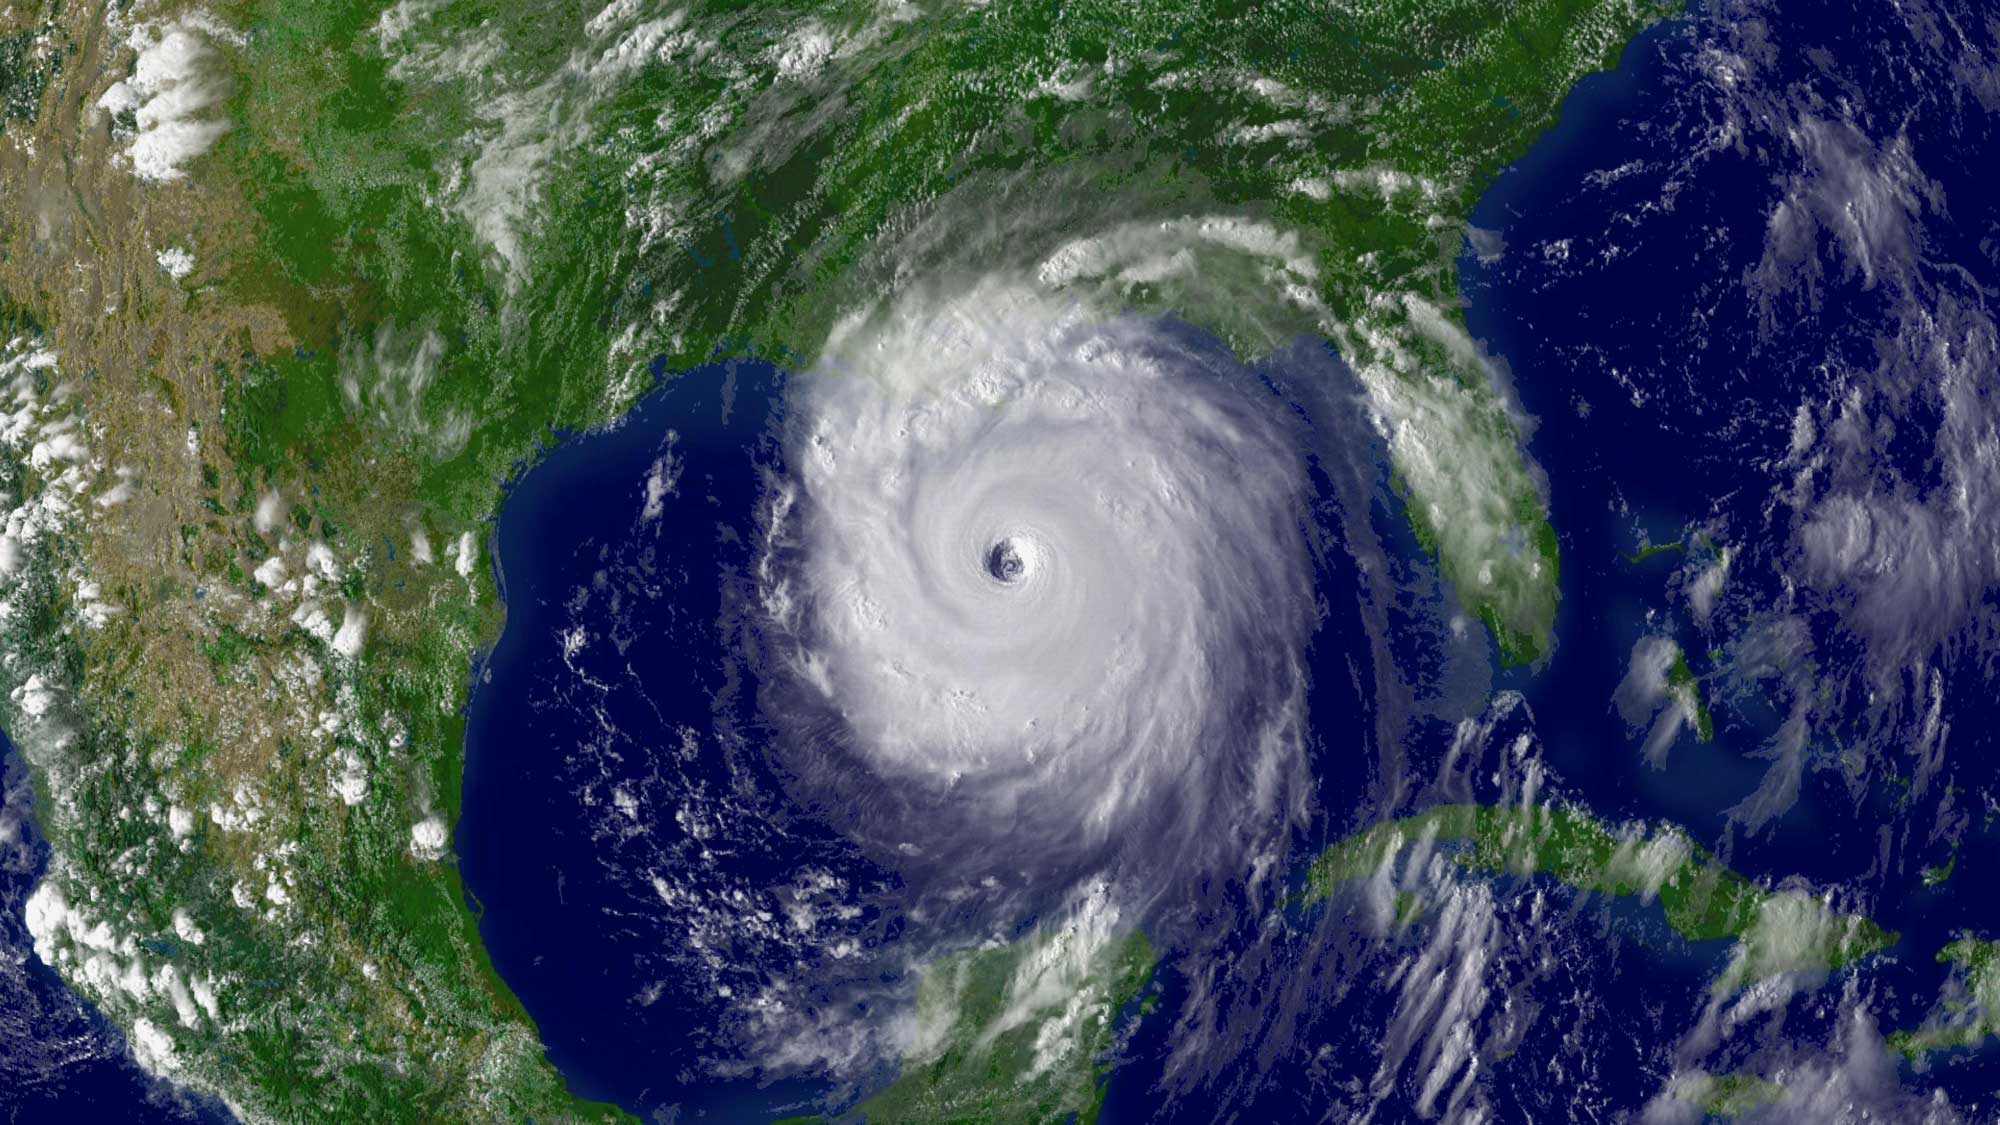 Satellite image of Hurricane Andrew over 3 days in 1992. The storm moves from the Atlantic Ocean, over Florida, and into the Gulf of Mexico.